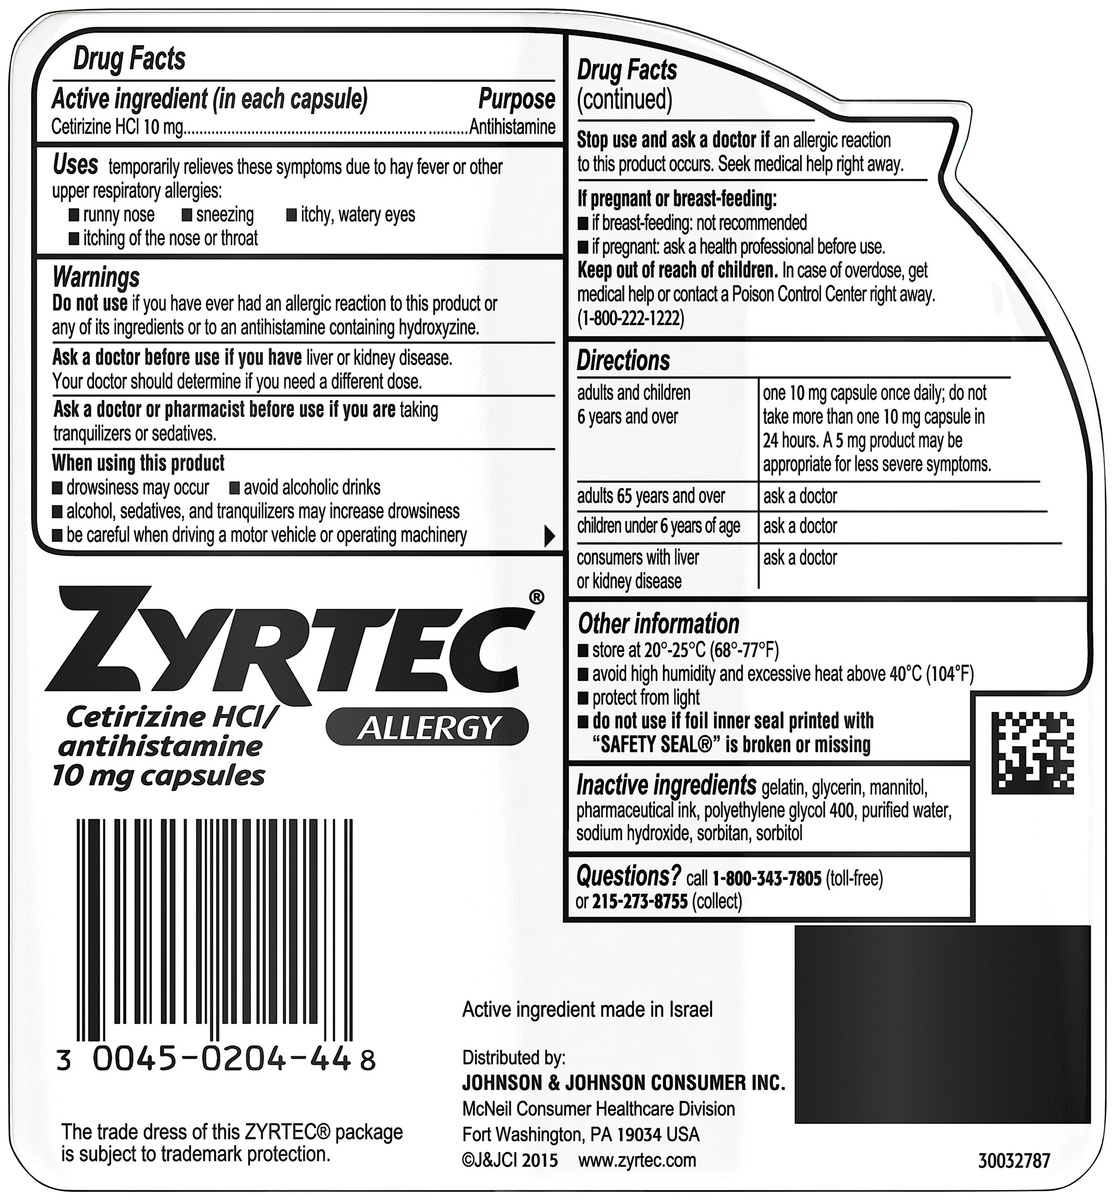 slide 5 of 6, Zyrtec 24 Hour Allergy Relief Liquid Gels, Antihistamine Capsules with Cetirizine Hydrochloride Allergy Medicine for All-Day Relief from Runny Nose, Sneezing, Itchy Eyes & More, 40 ct